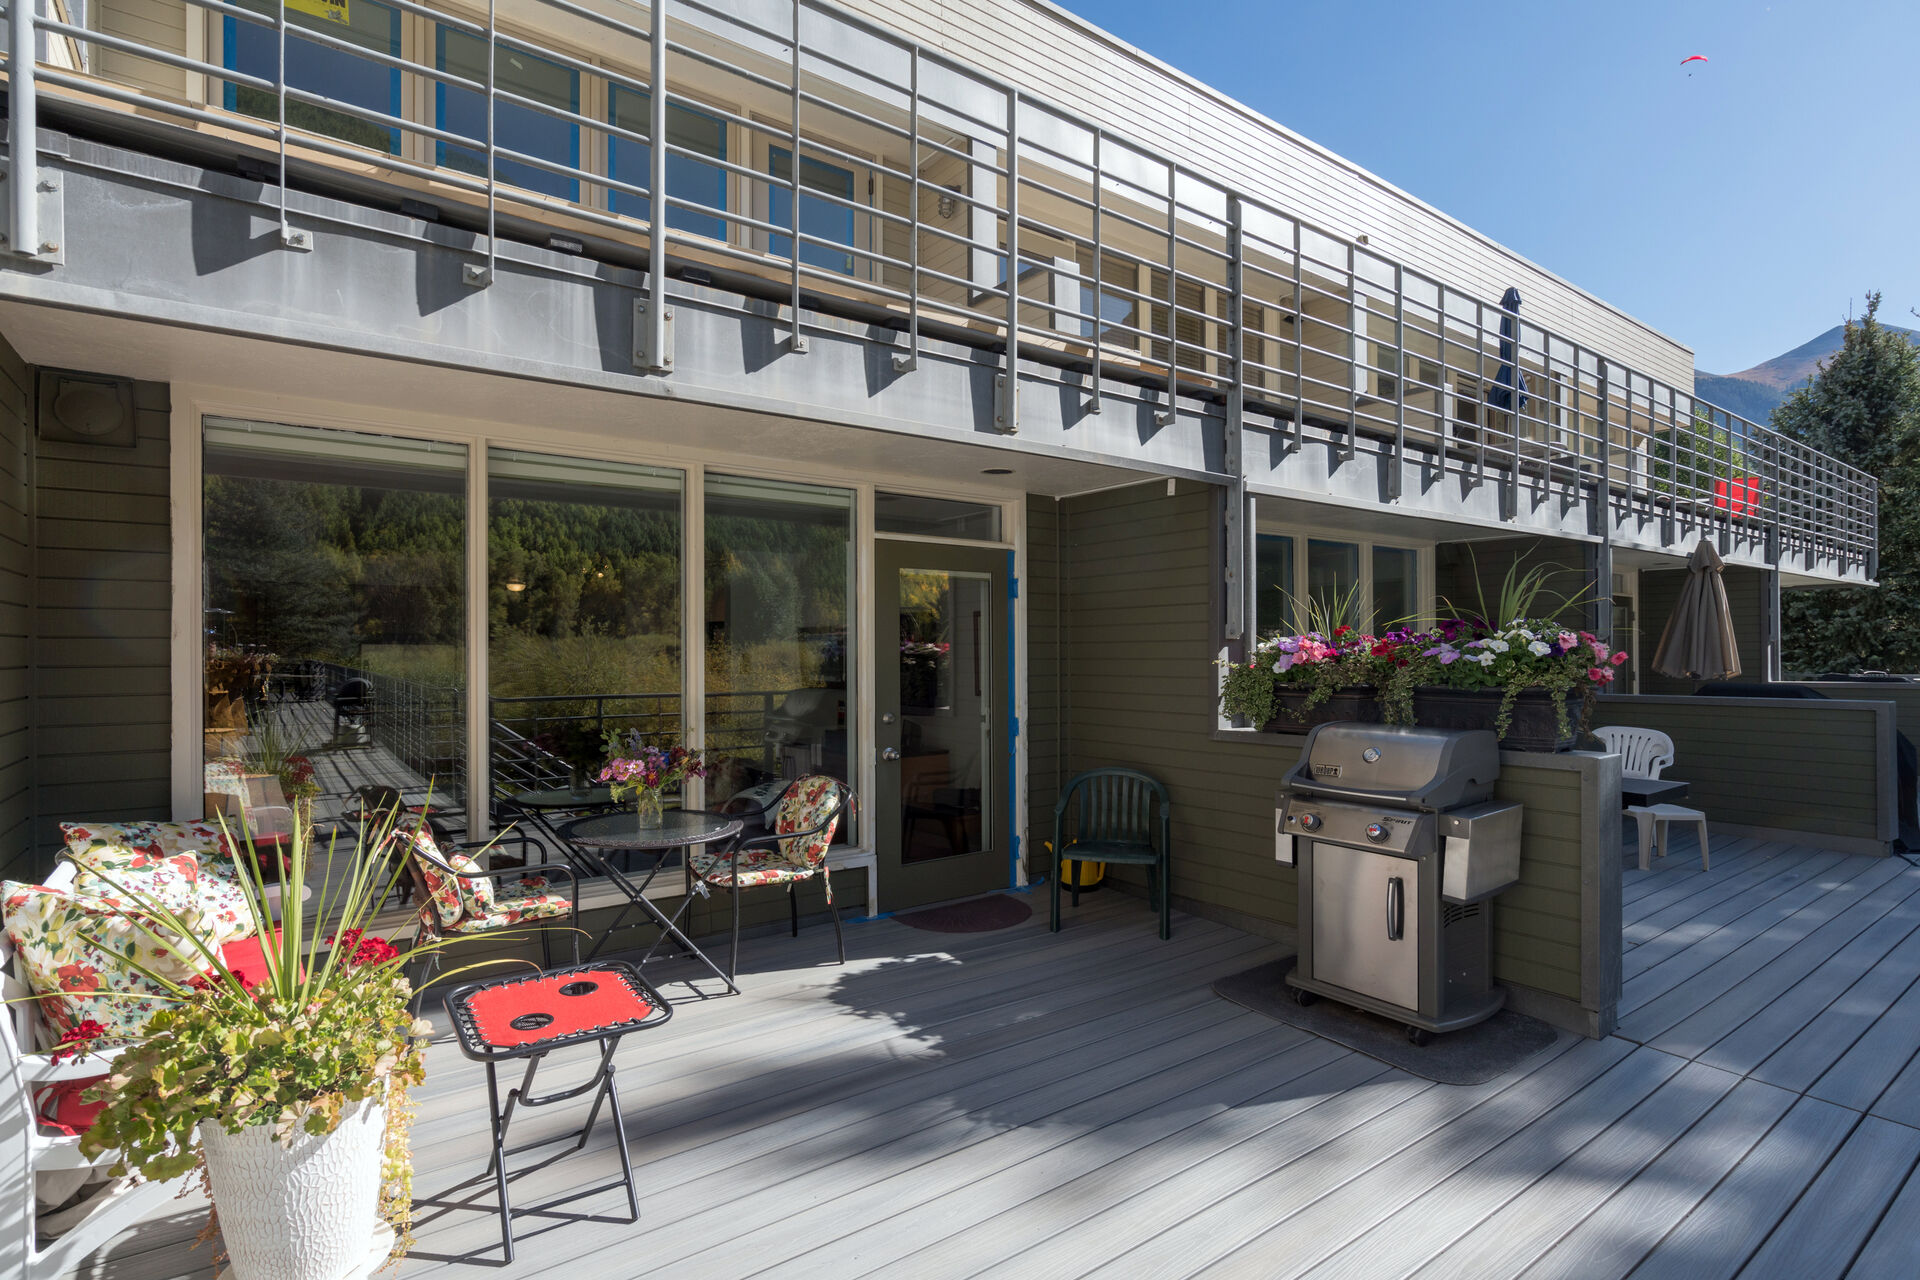 An external view of this Telluride condo, showing the deck with grill and seating.